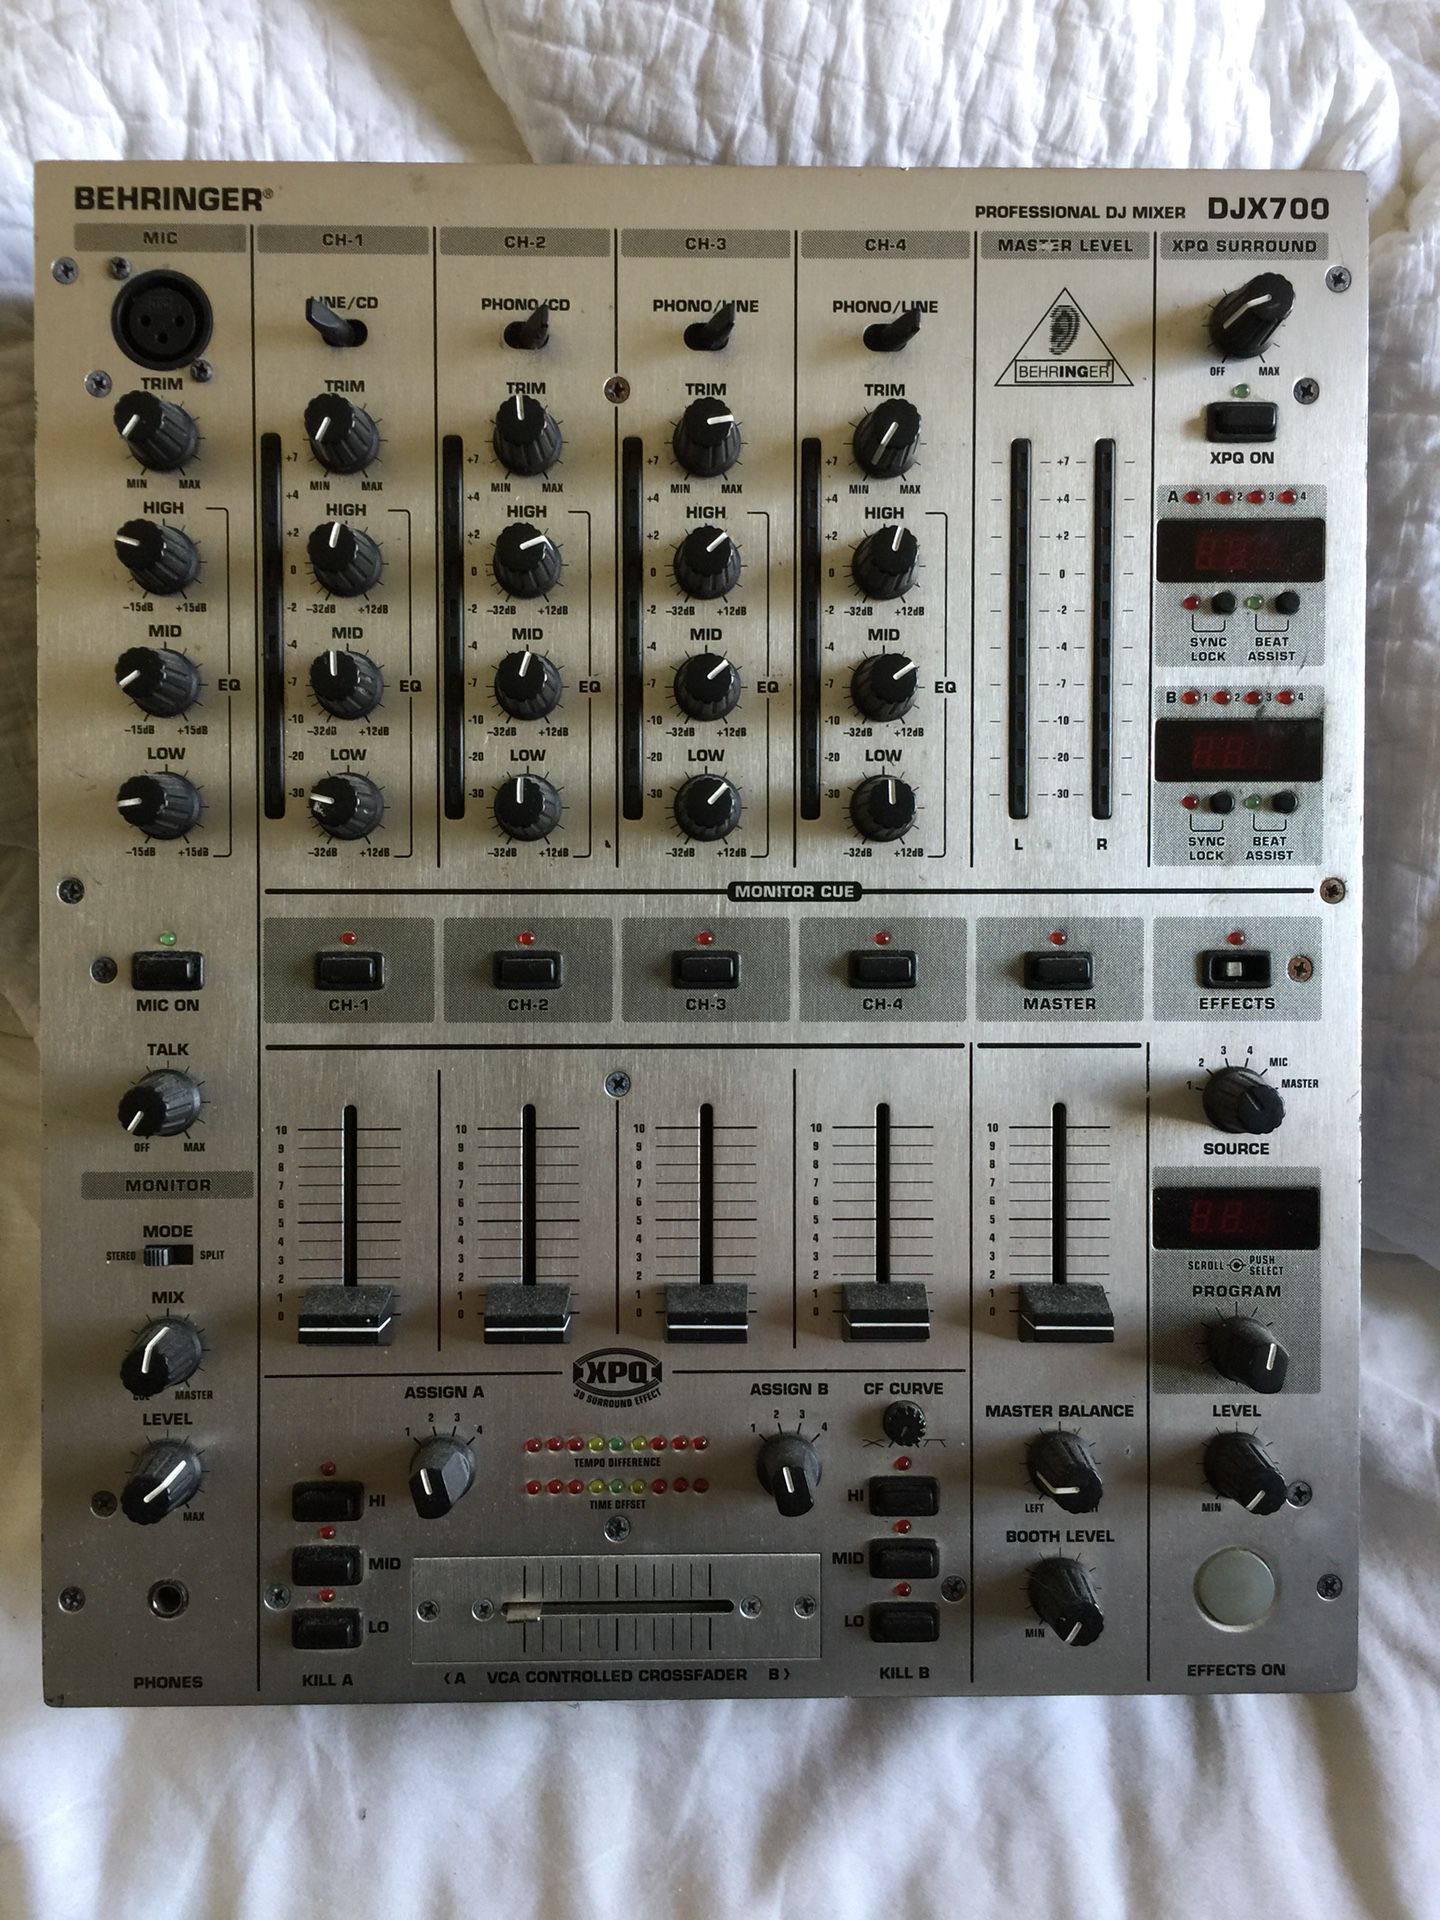 Behringer DJX-700 dj mixer with effects